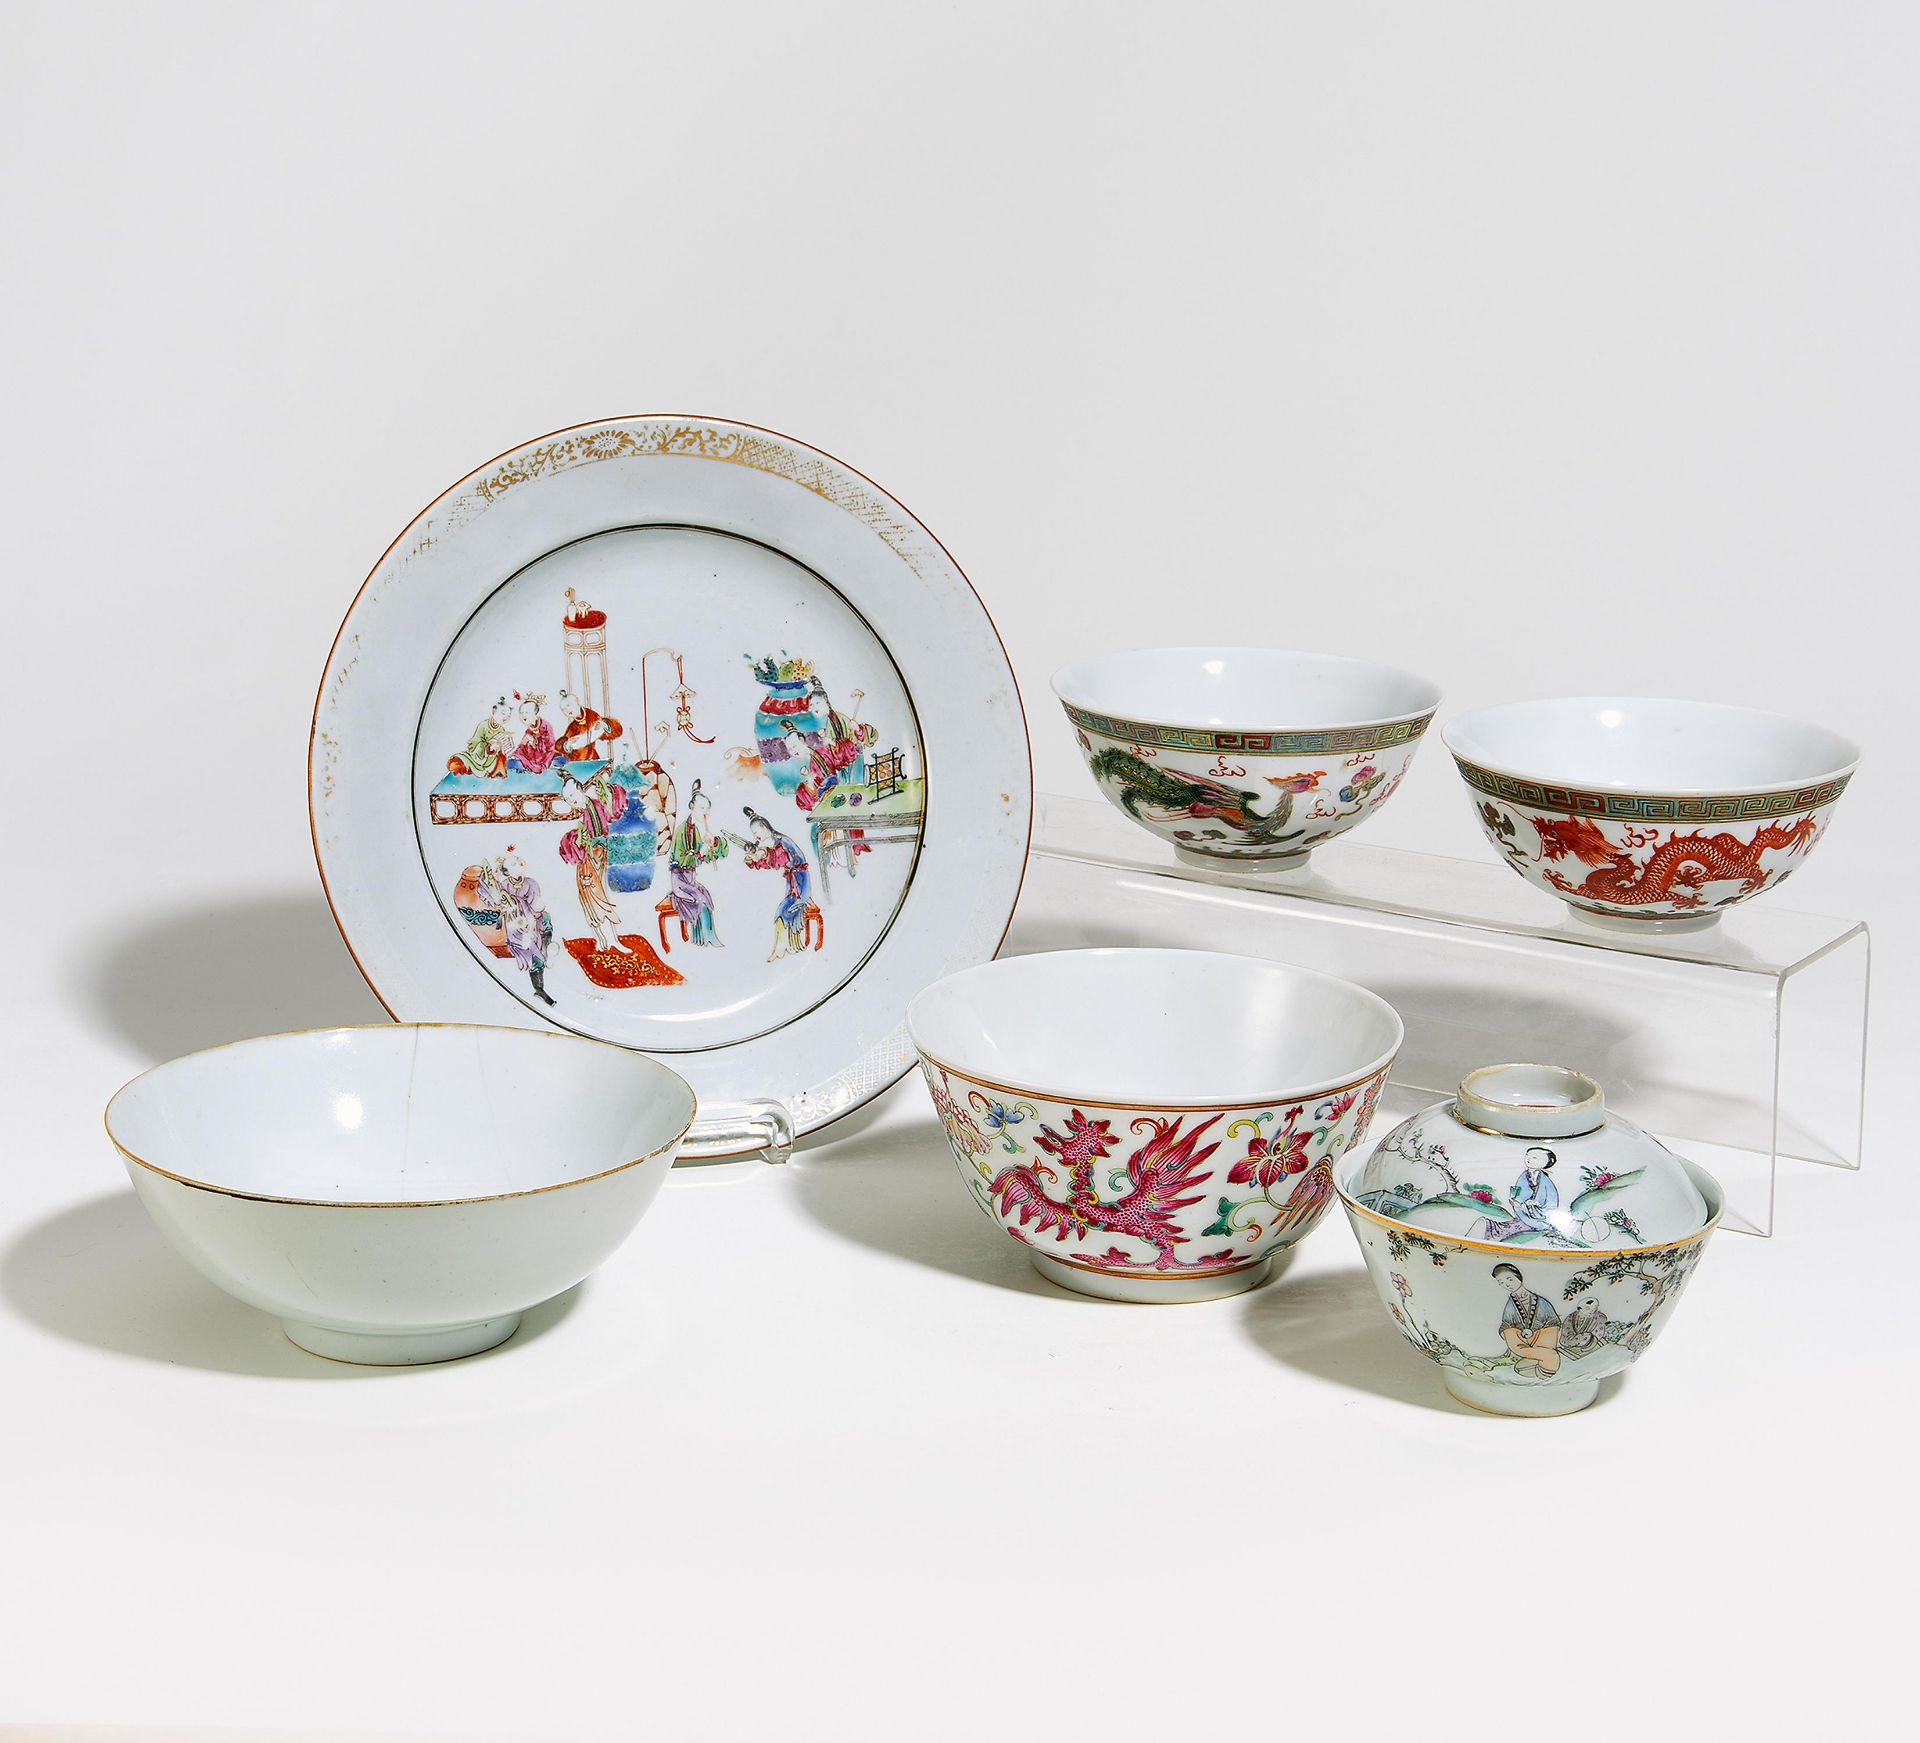 LOT OF SIX PORCELAIN PIECES. Origin: China. Dynasty: Qing dynasty and later. Date: 18th-20th c.